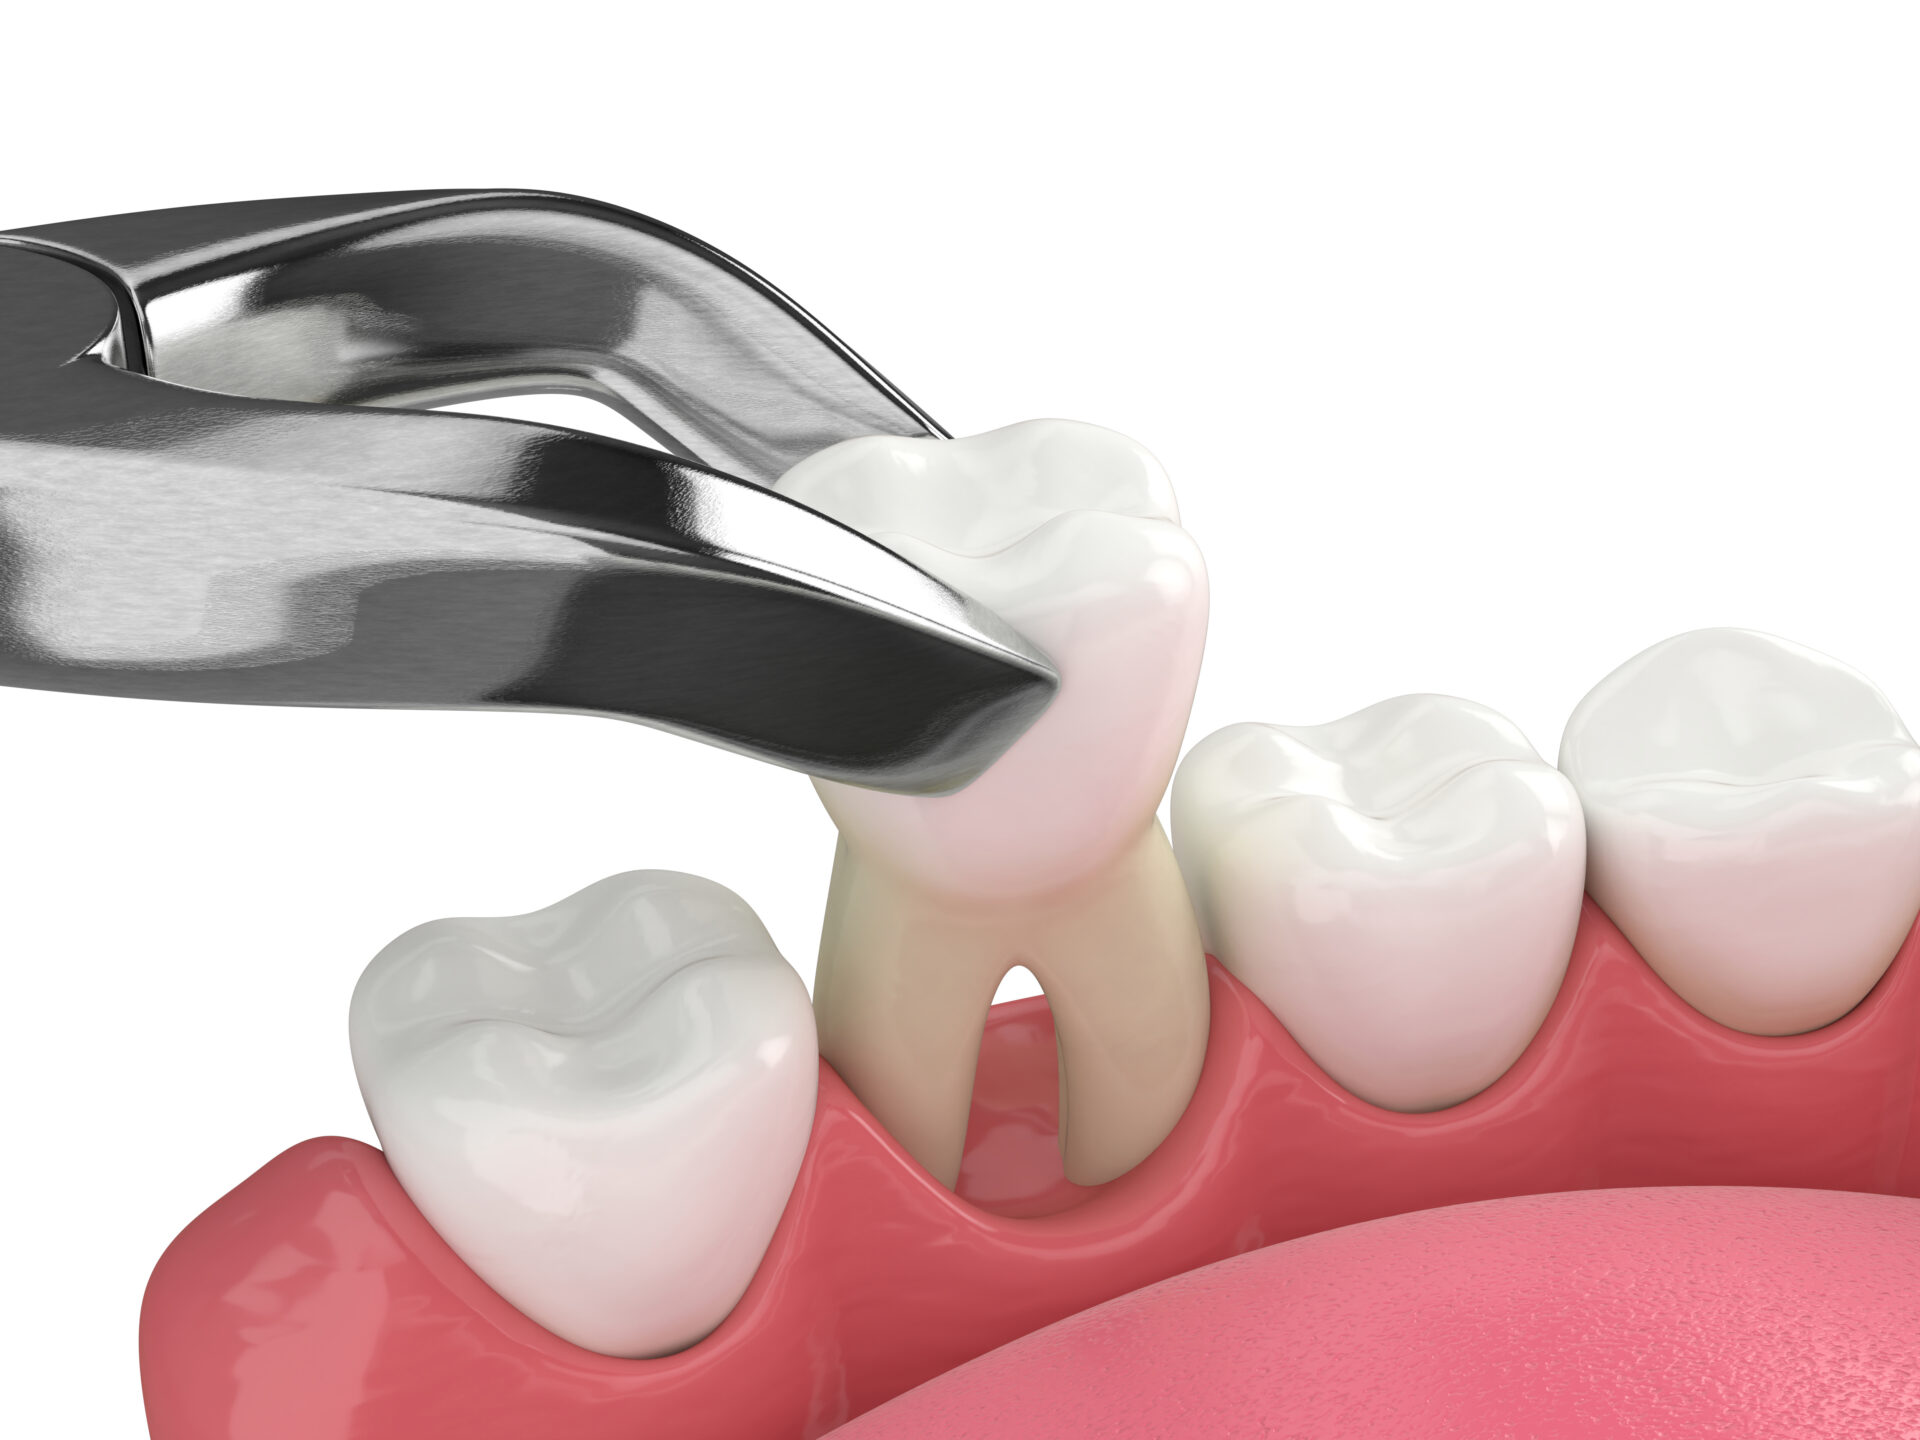 what are the stages of healing after a tooth extraction